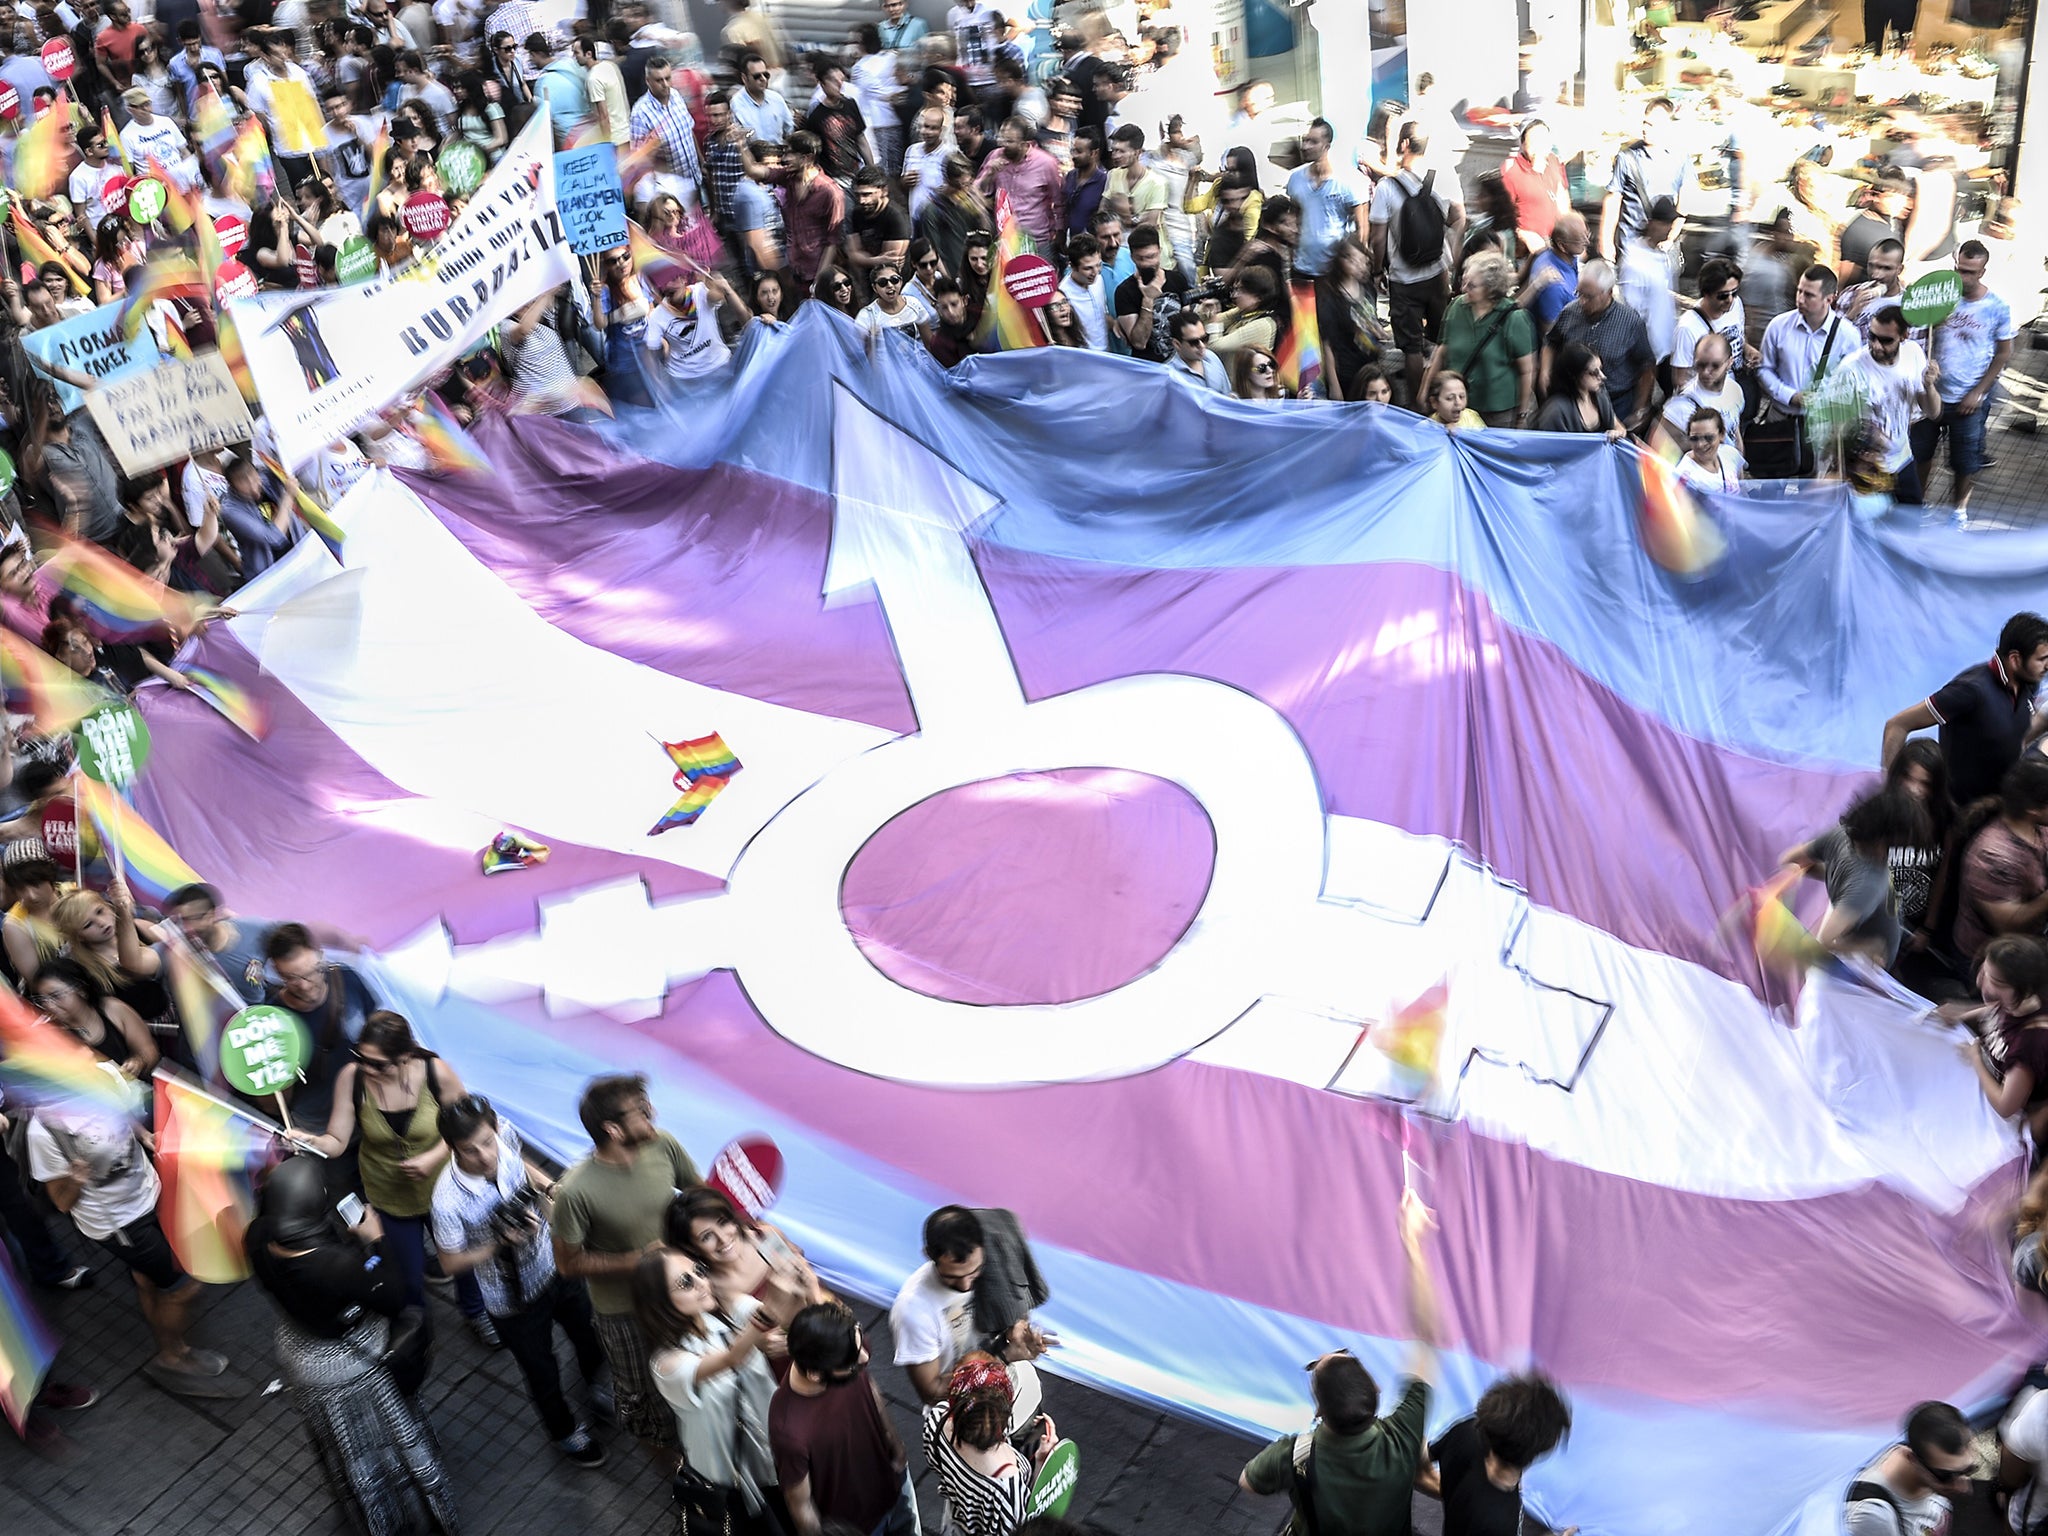  A giant transgender flag is displayed during the Trans Pride Parade